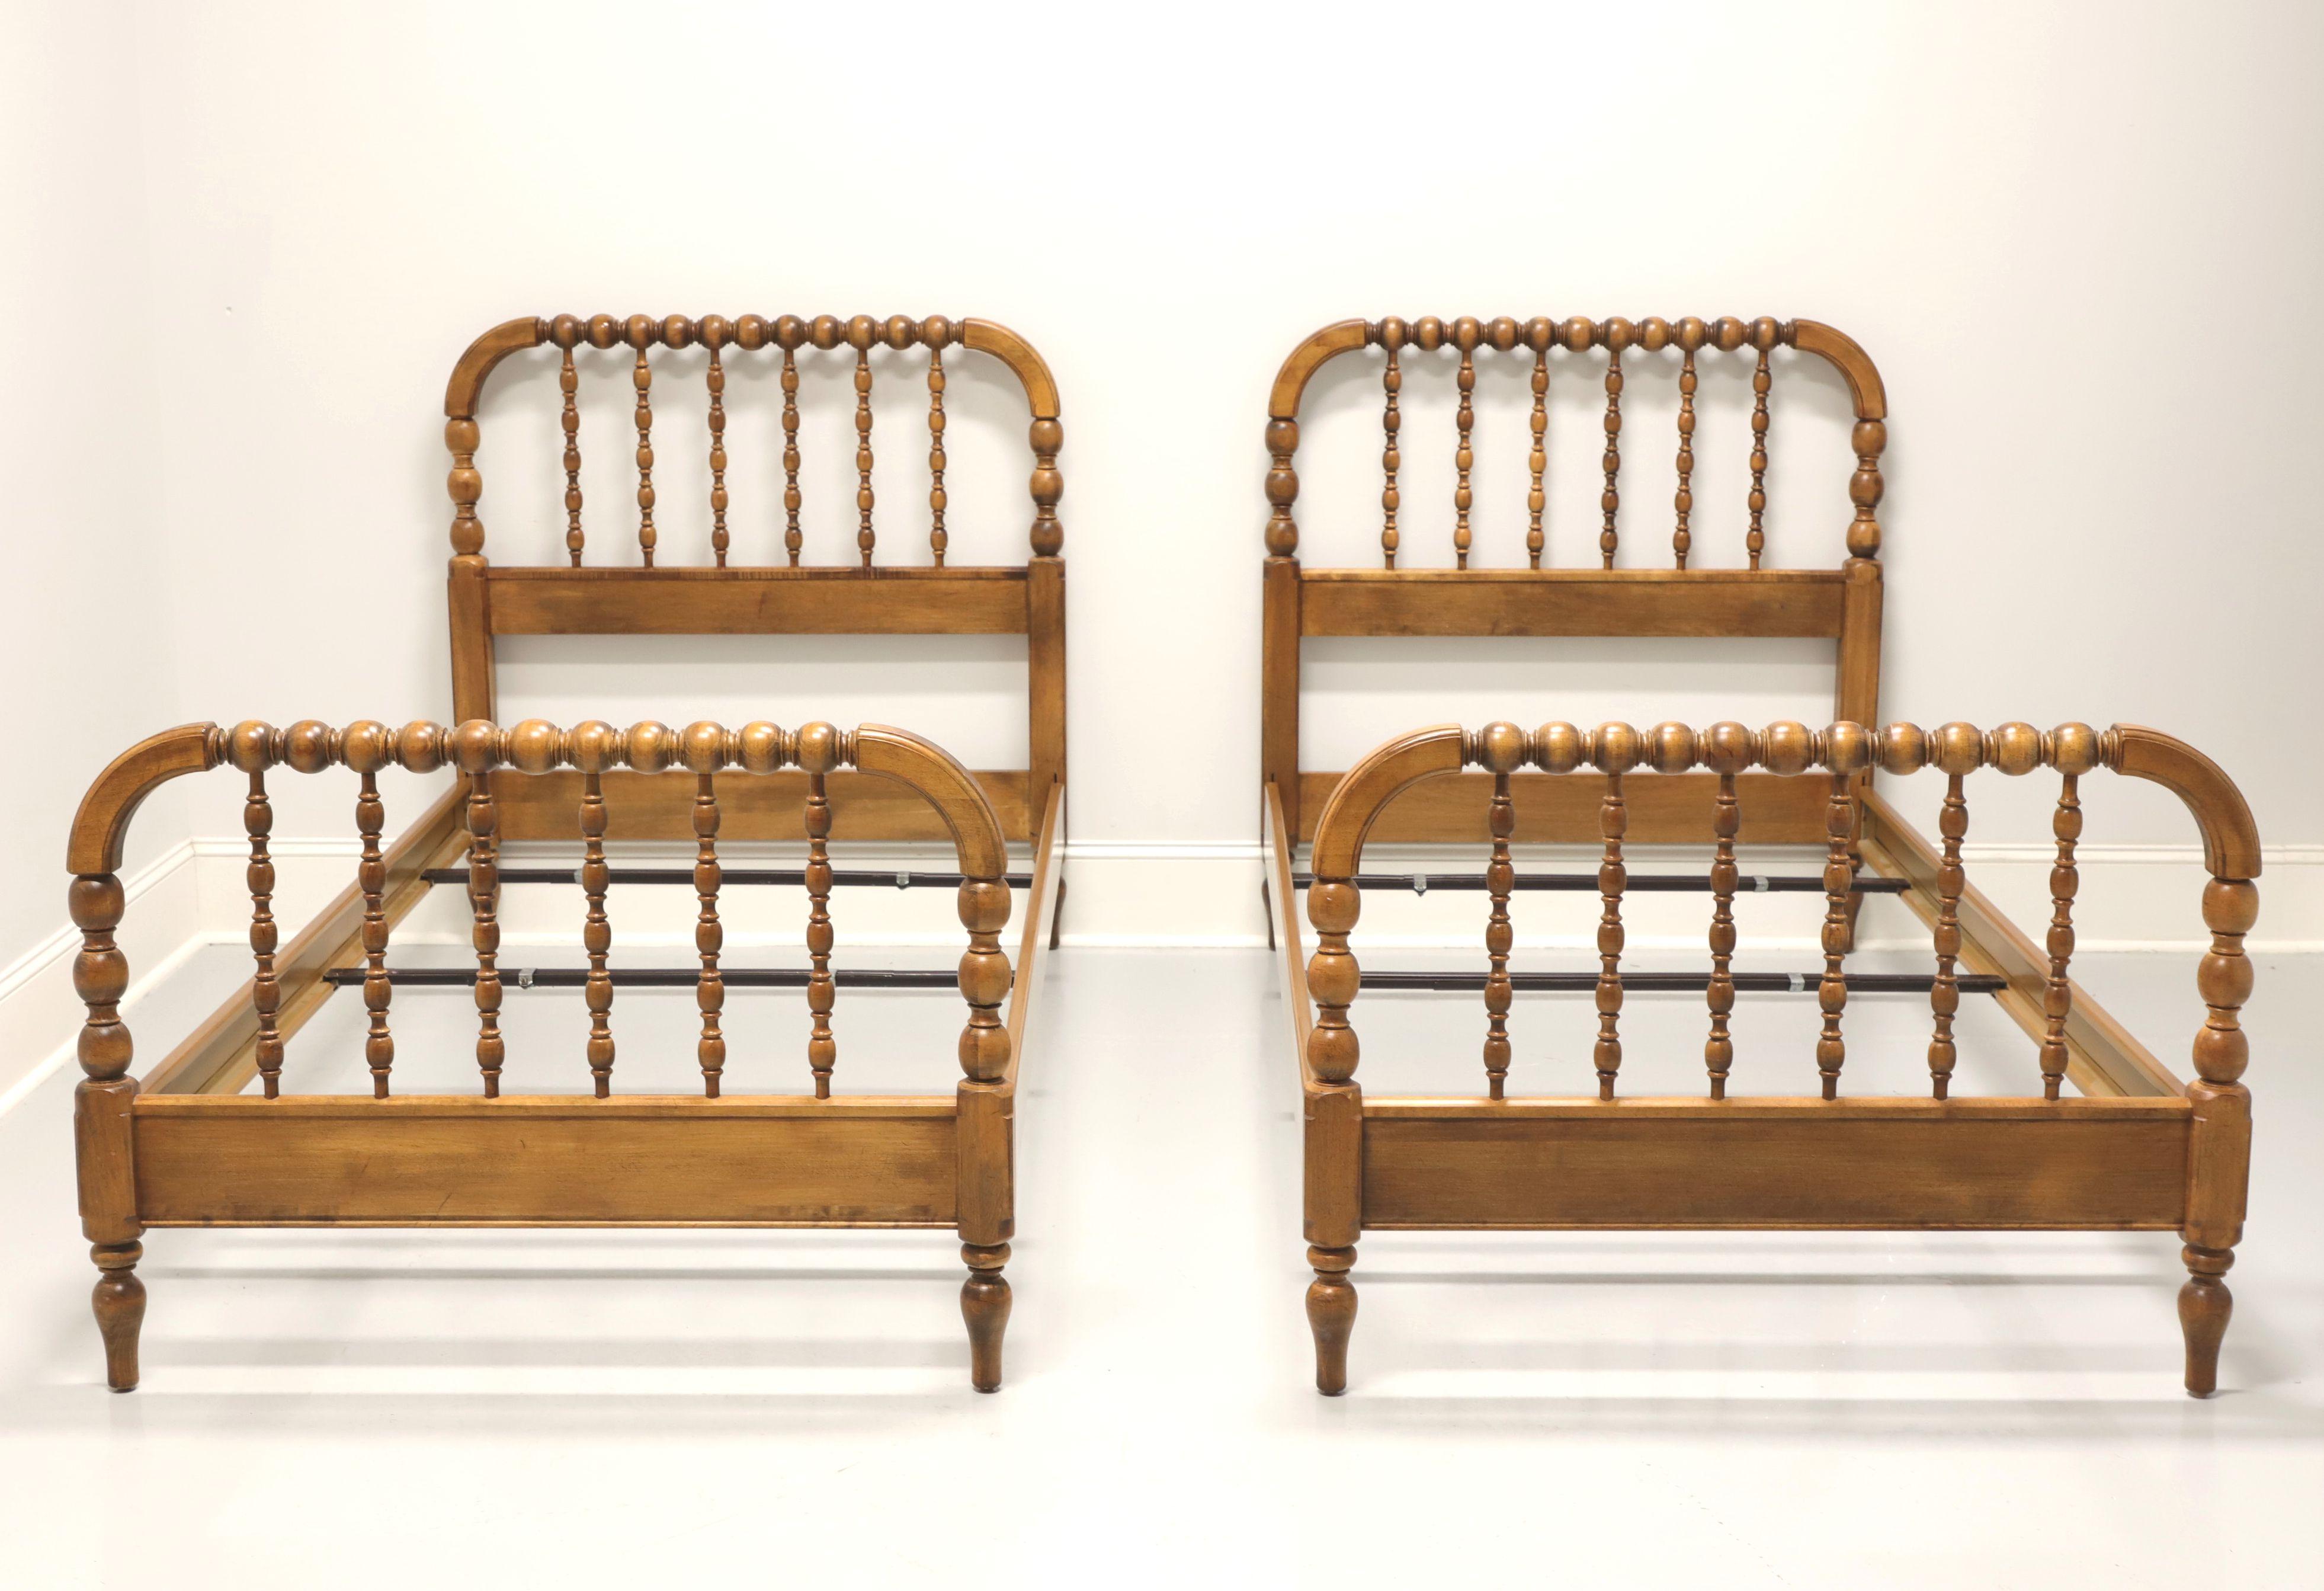 ETHAN ALLEN Maple Jenny Lind Twin Size Beds - Pair 2